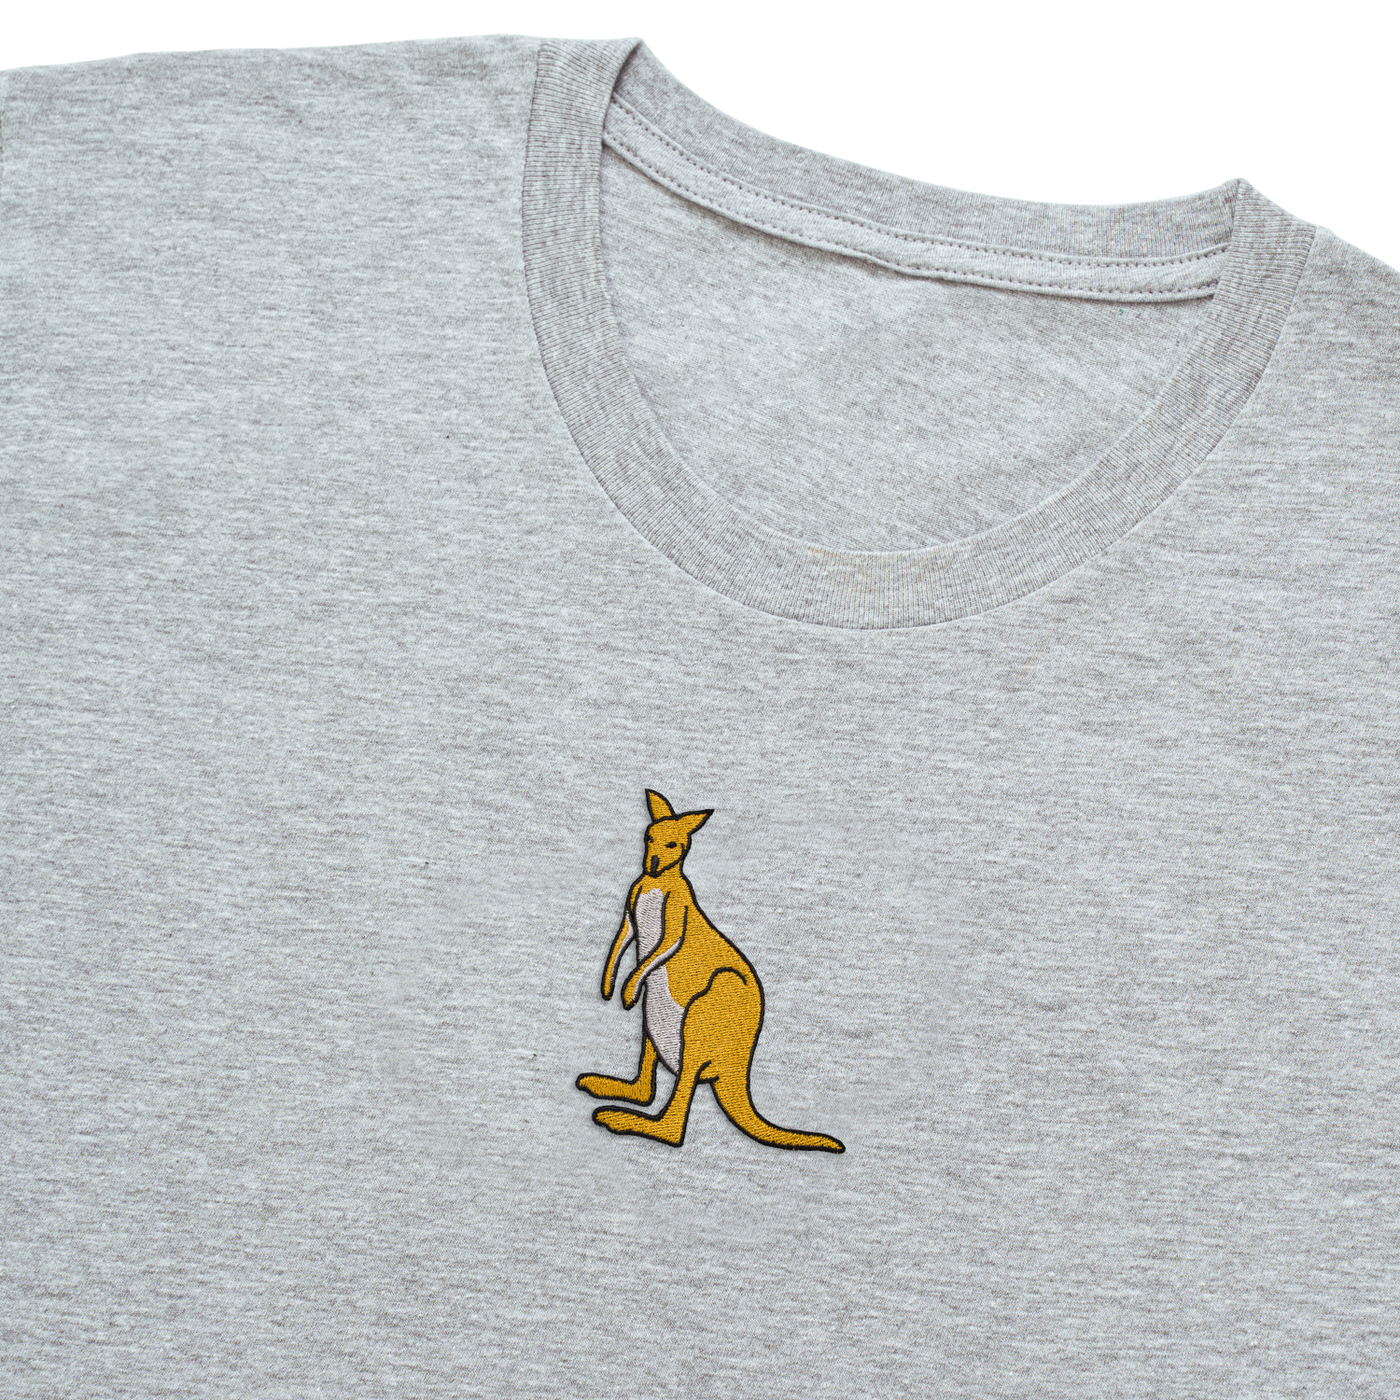 Bobby's Planet Men's Embroidered Kangaroo T-Shirt from Australia Down Under Animals Collection in Athletic Heather Color#color_athletic-heather